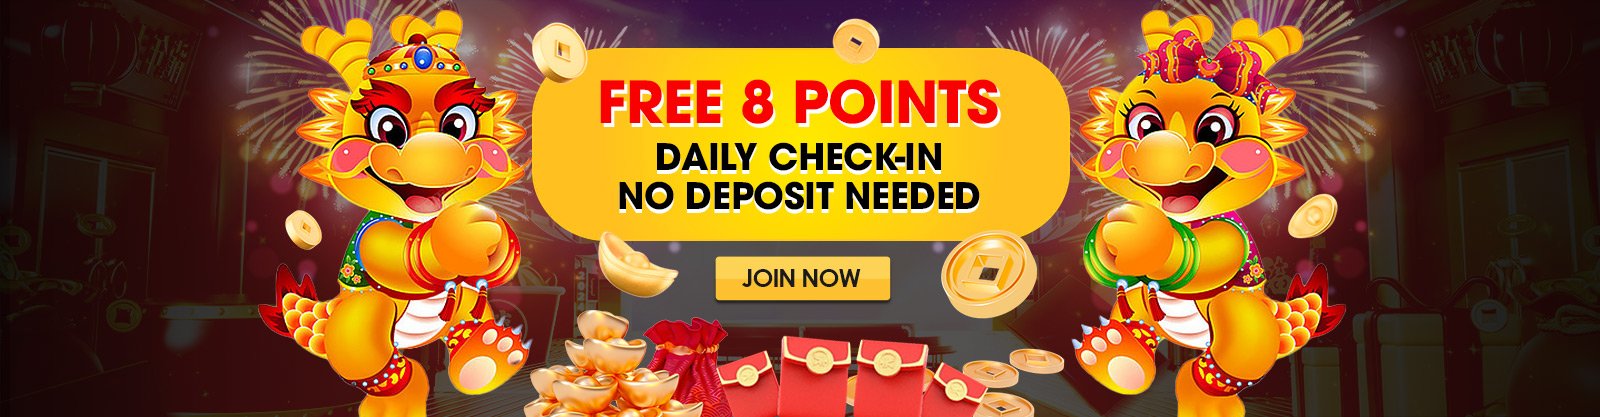 Free 8 Points